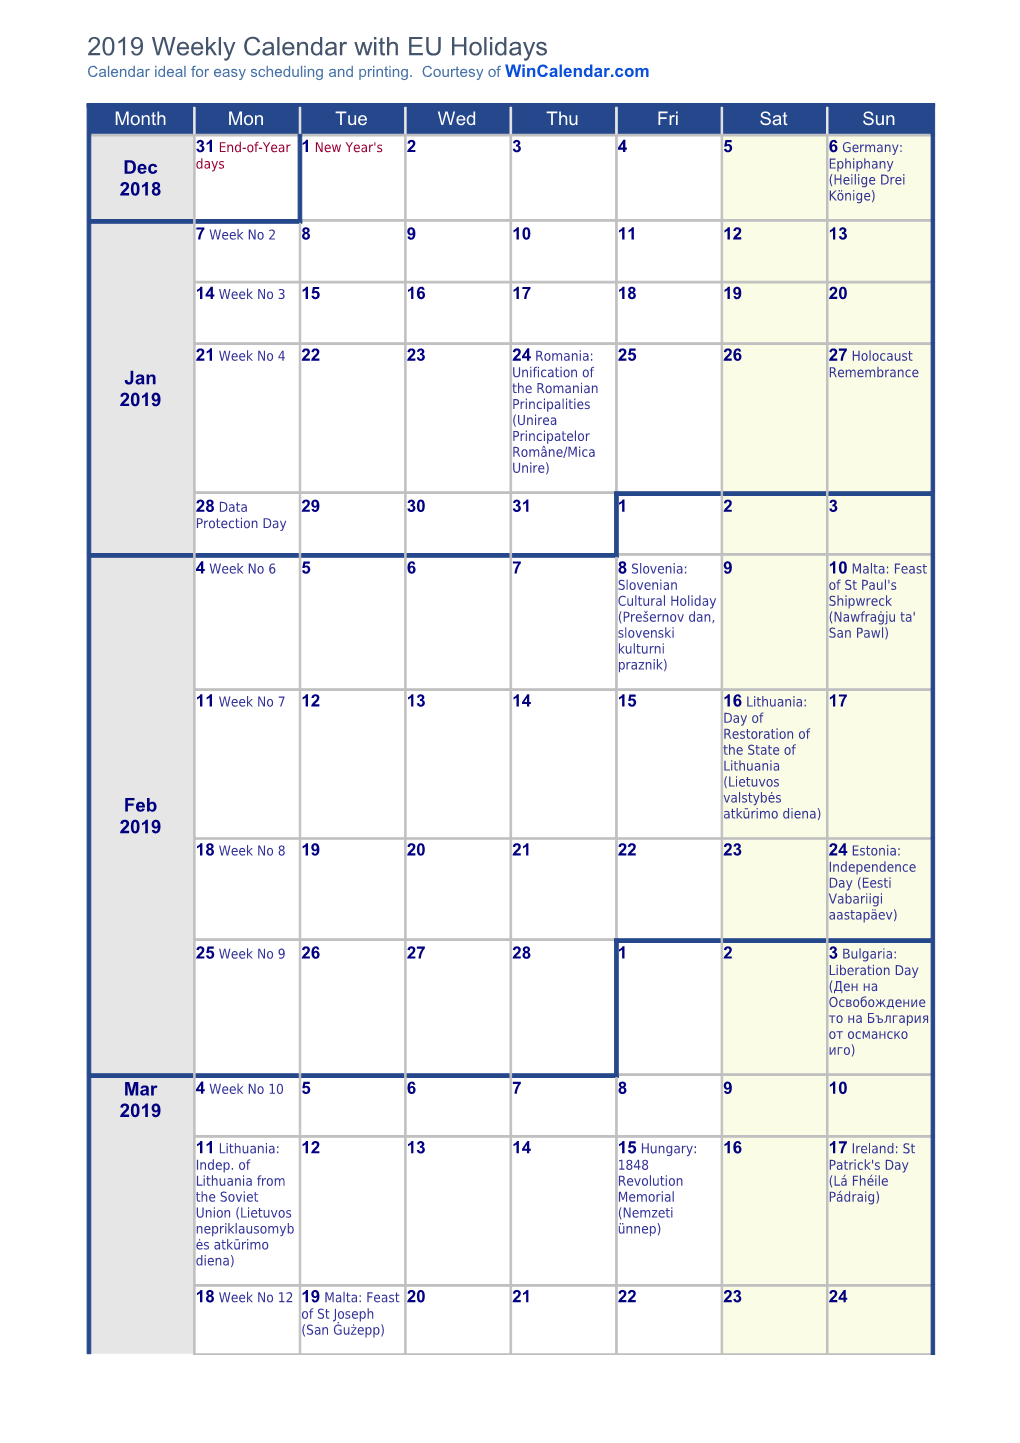 Weekly Calendar 2019 with Festive and National Holidays European Union